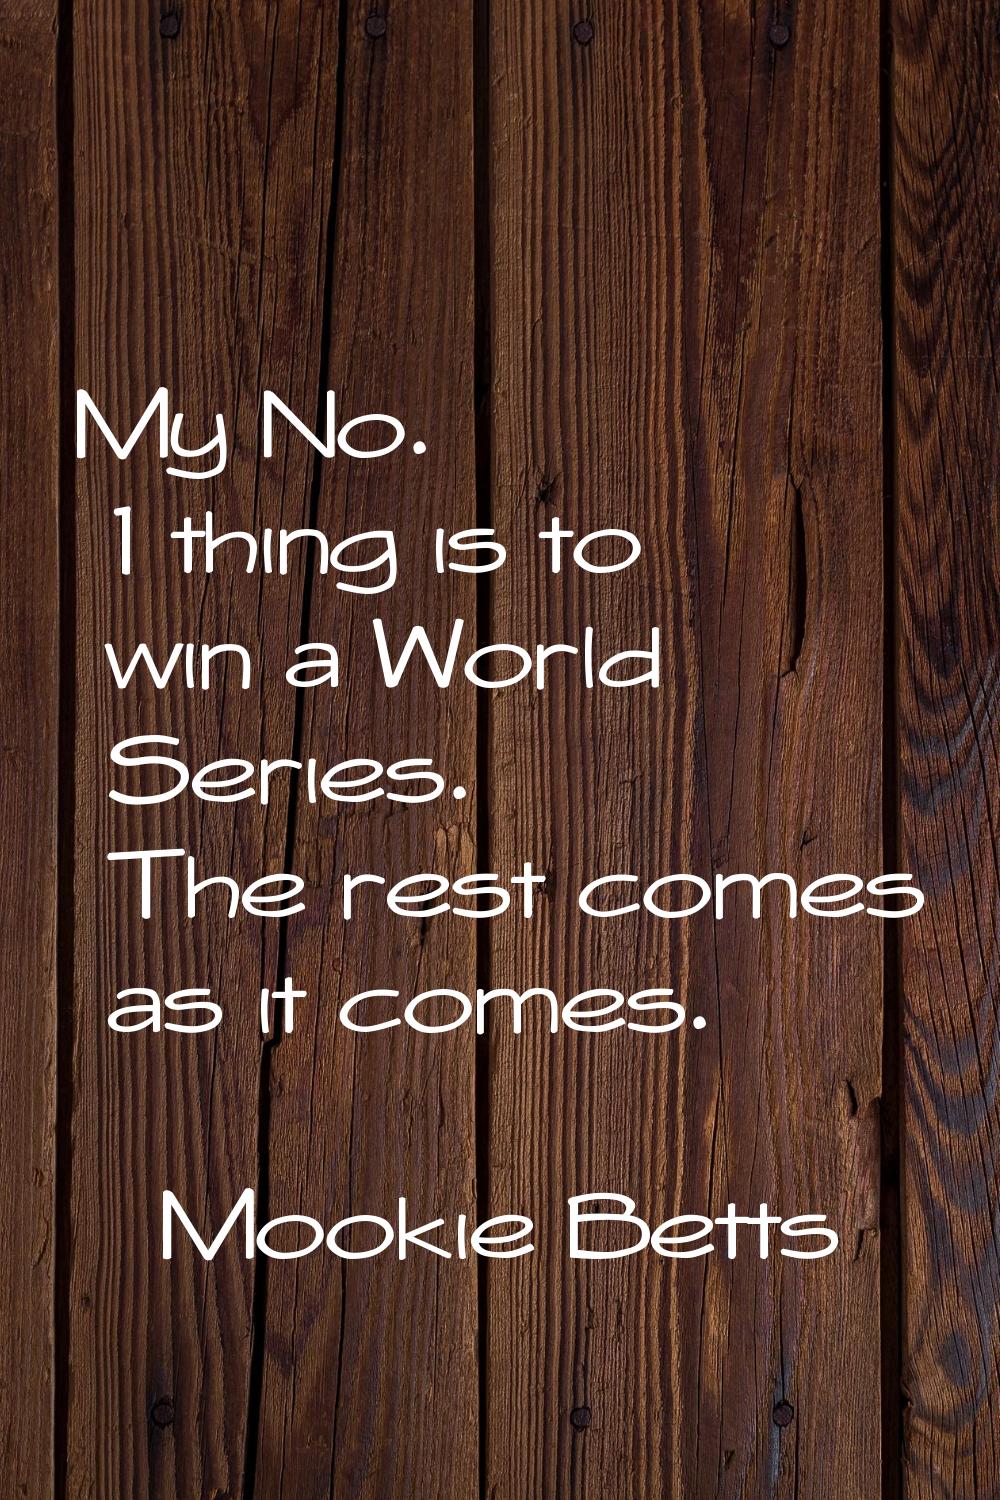 My No. 1 thing is to win a World Series. The rest comes as it comes.